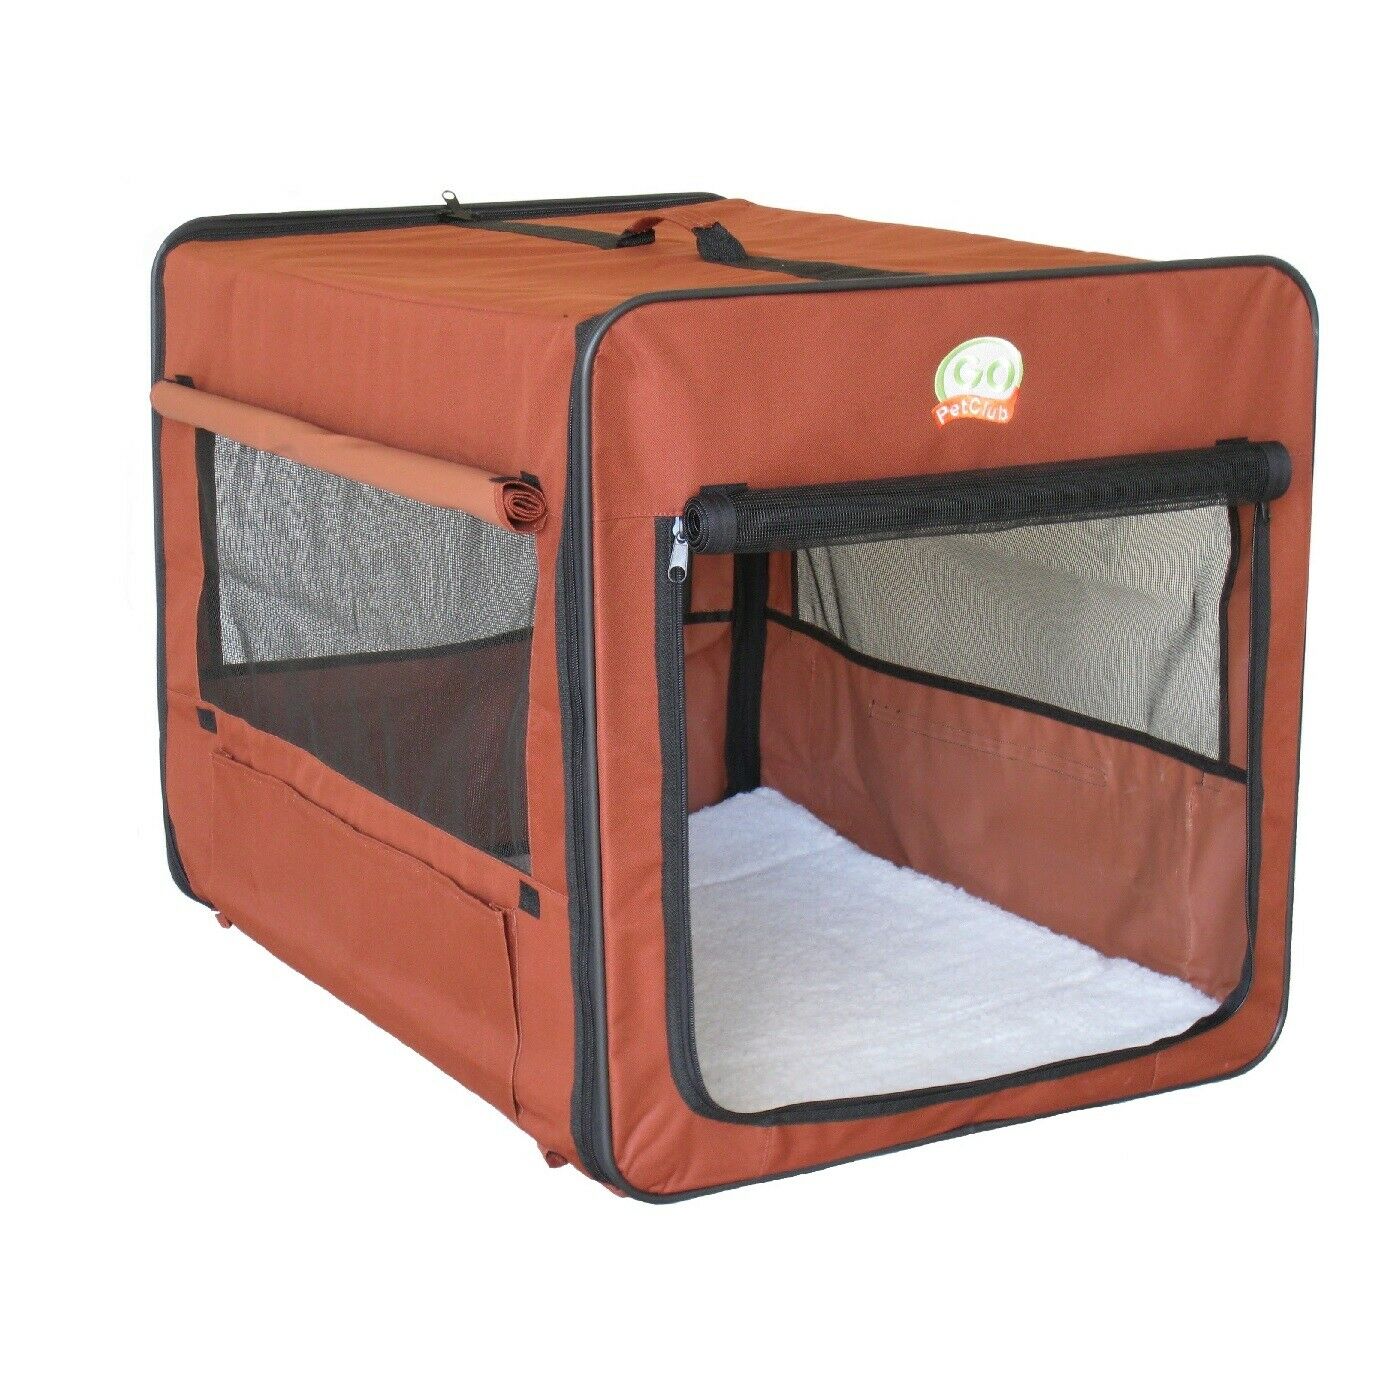 Portable Dog Cage For Medium Pet Brown Soft Side Carrier Kennel Puppy Crate